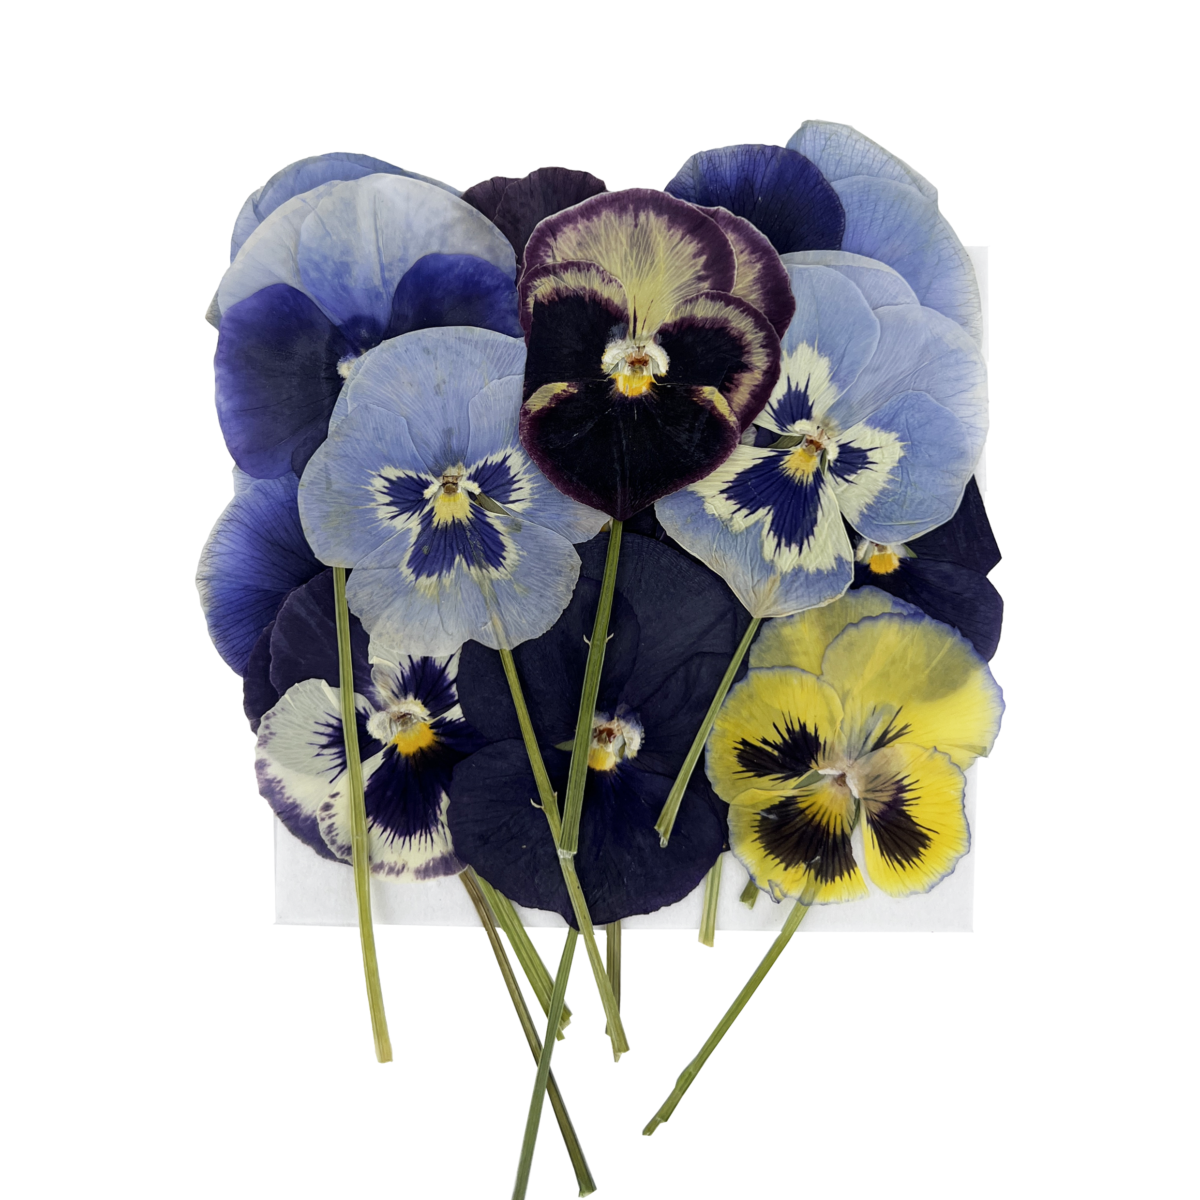 Pressed Edible Pansy With Stems